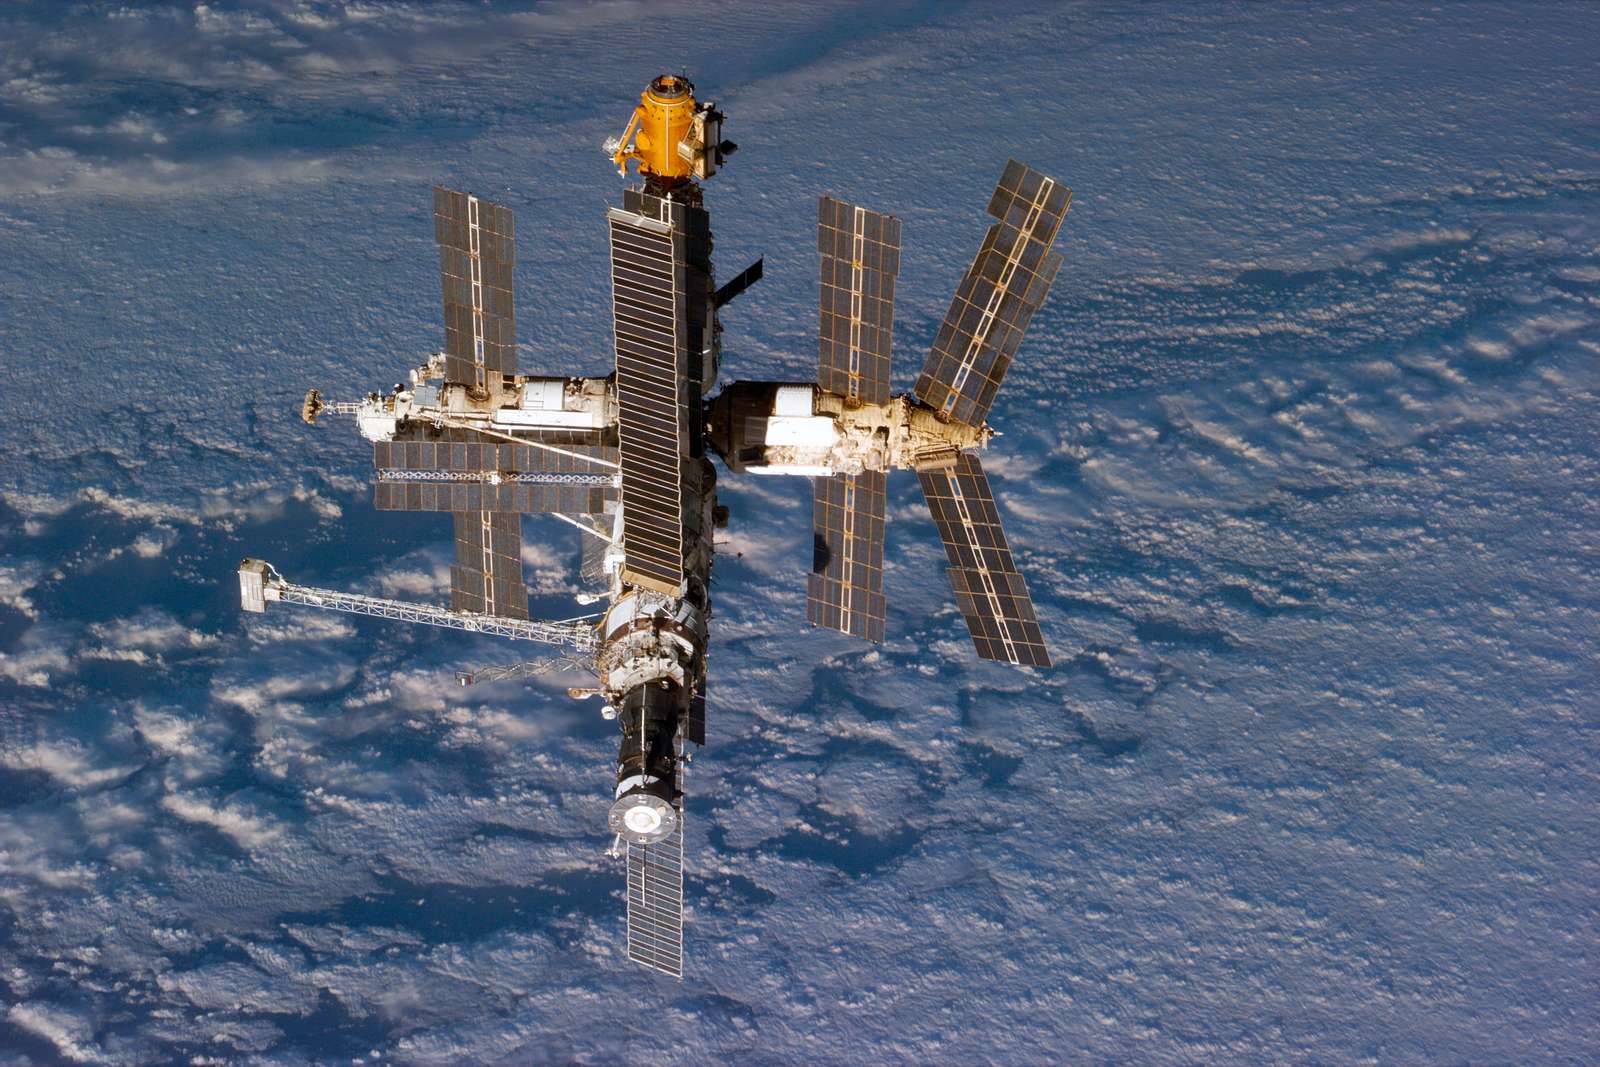 Mir Space Station As Seen After Undocking From The Shuttle Atlantis